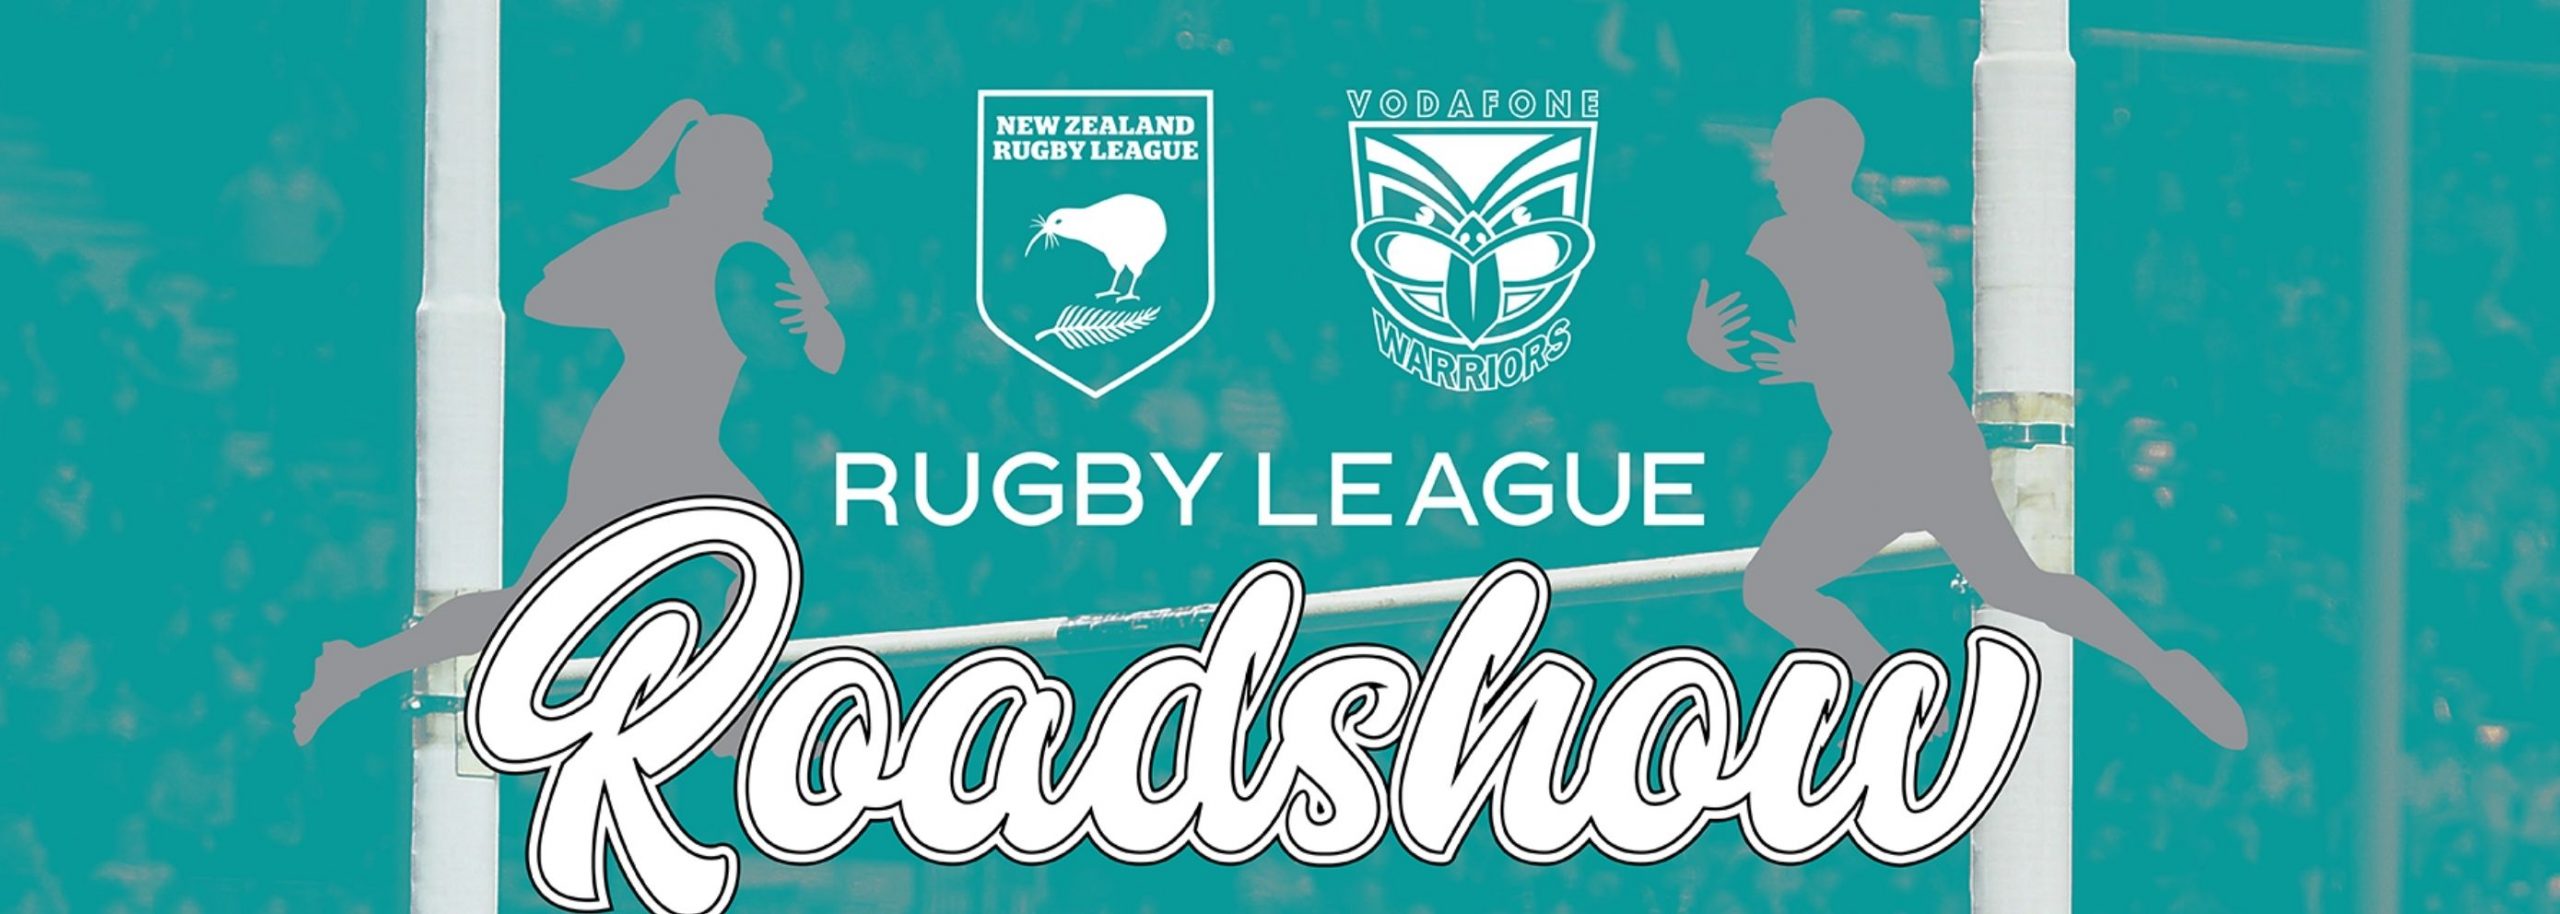 Visit our 2021 Sky Sports Rugby League Roadshows this weekend!